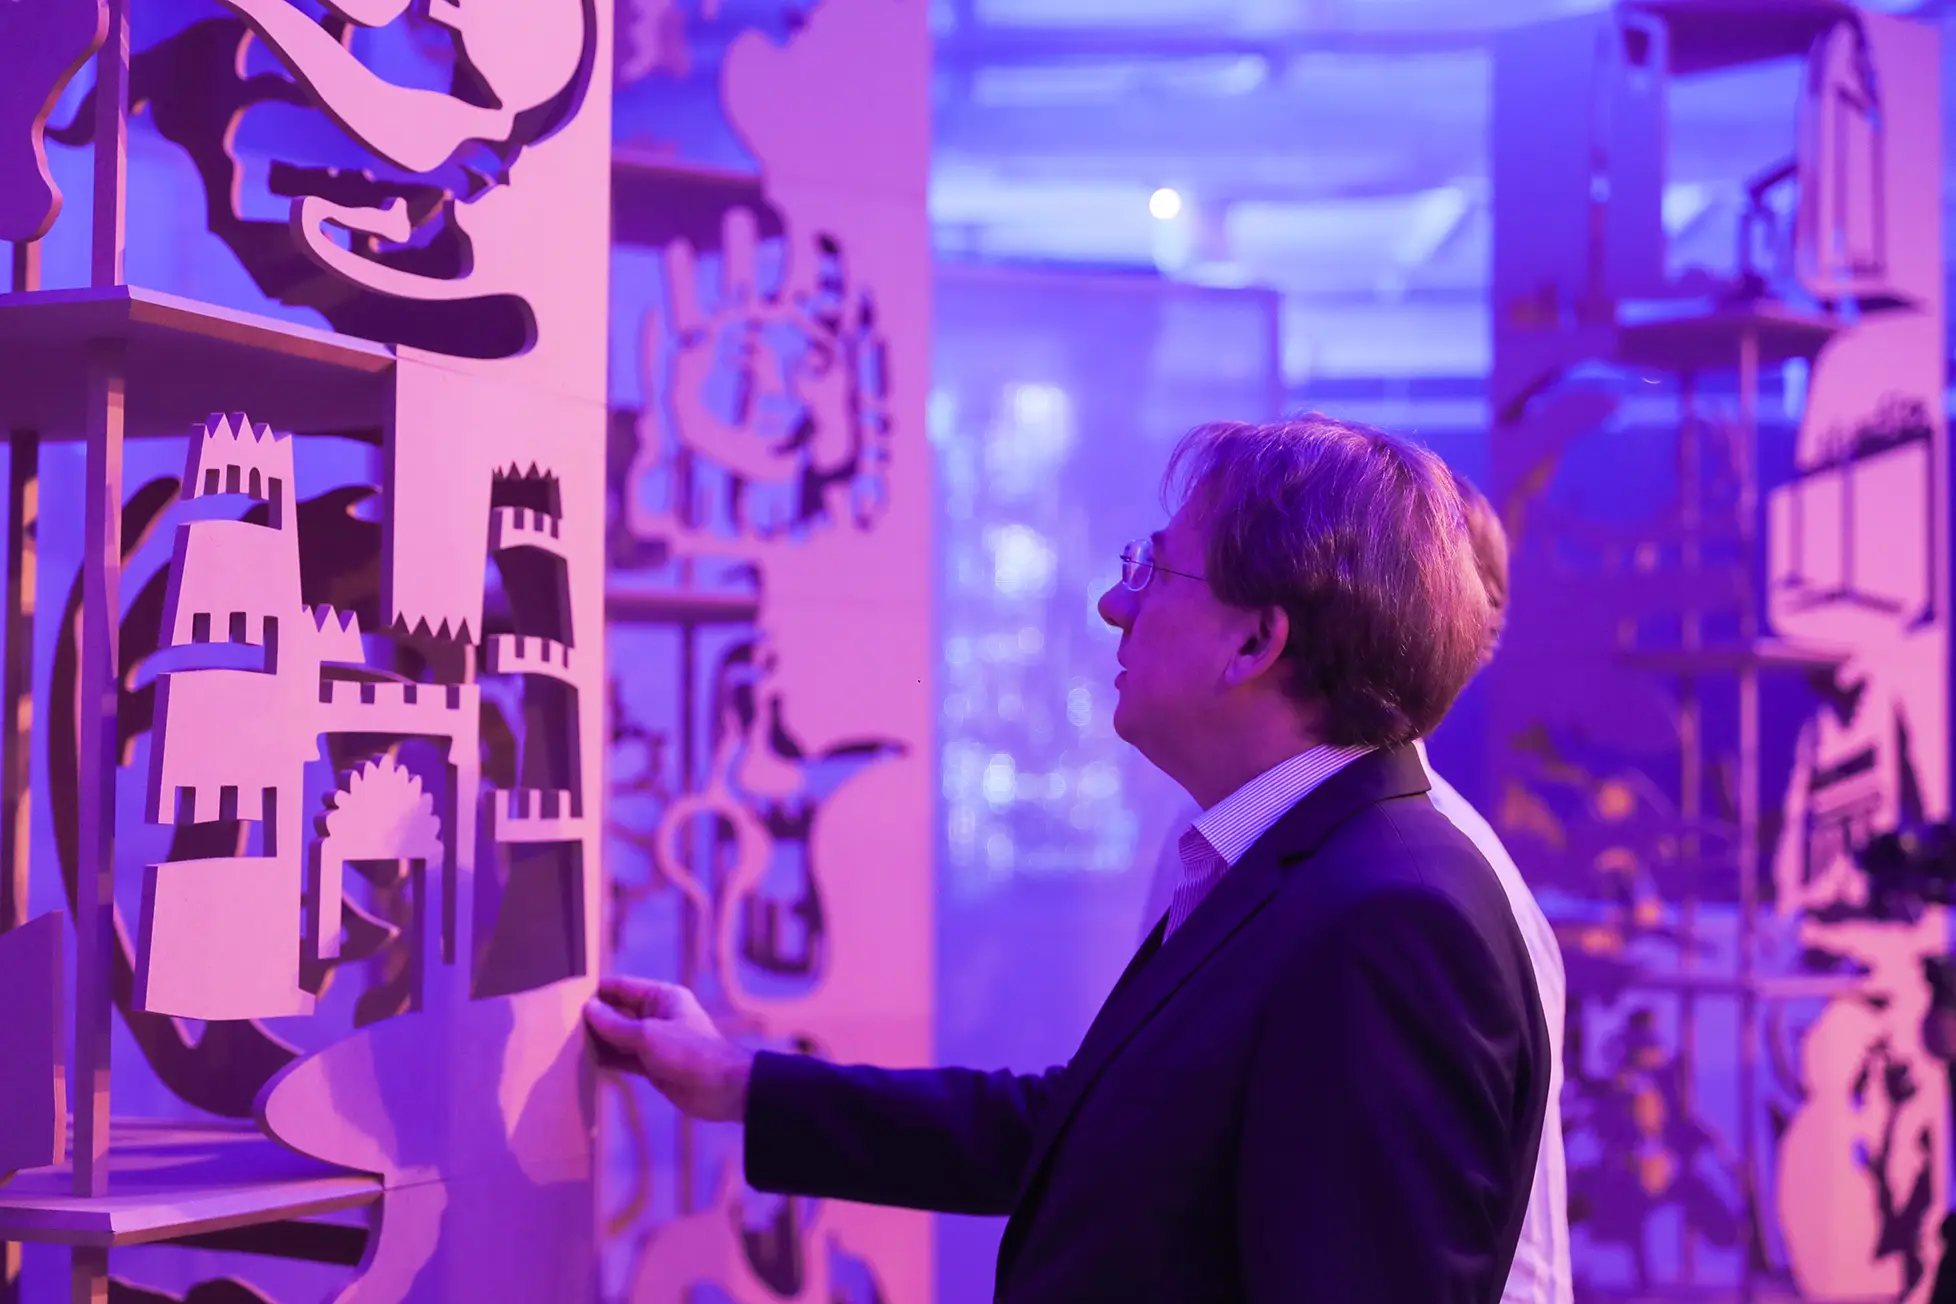 Cutout installation interconnected, a cutout installation for Jax Art Festival portraying the city of Riyadh and the Kingdom of Saudi Arabia by French artist Julien Gardair with Ambassador Ludovic Pouille